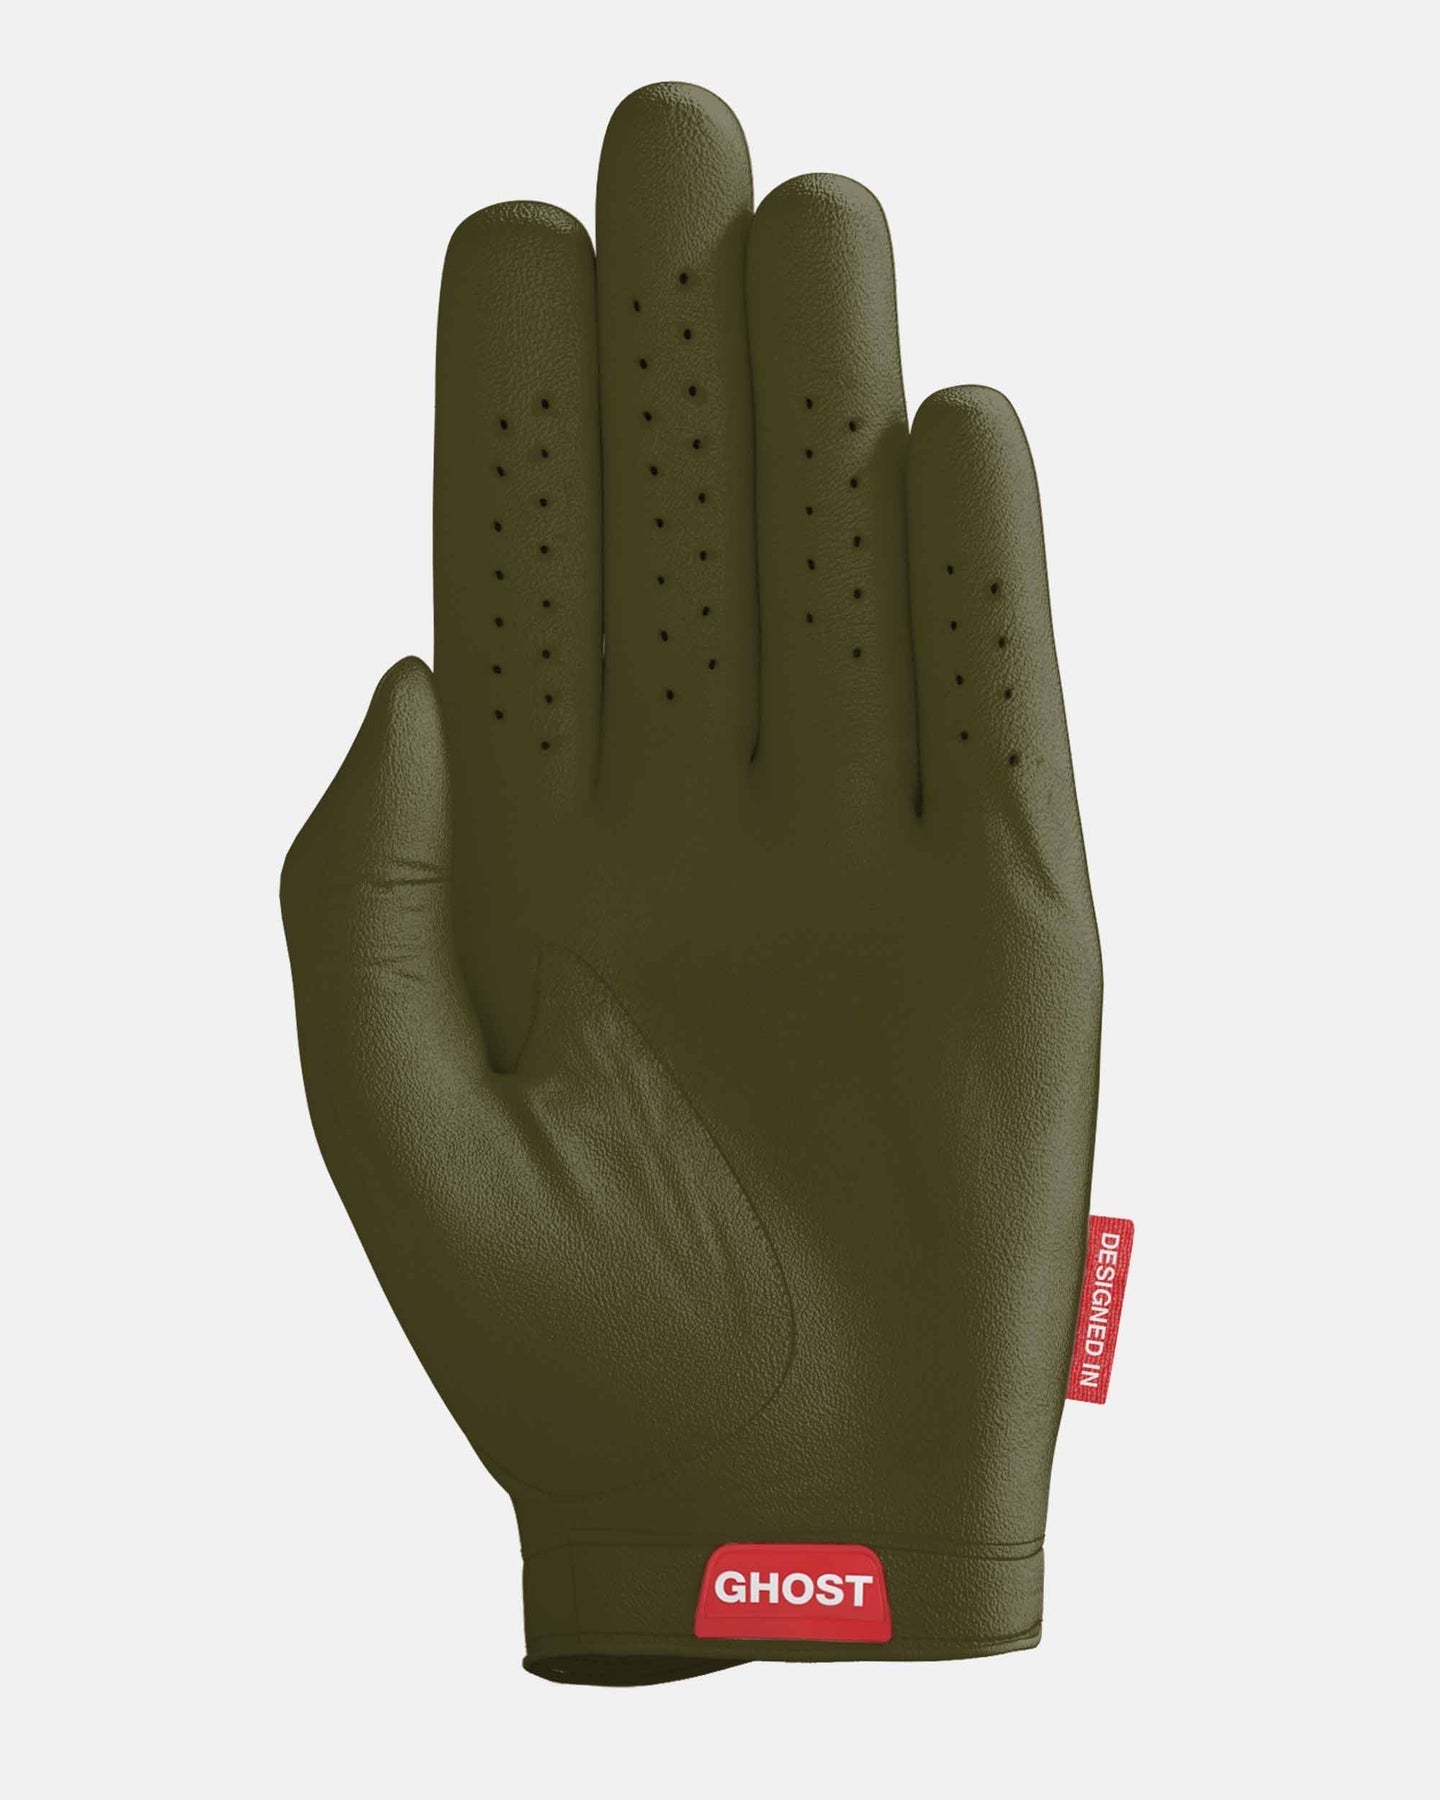 Ghost Left Hand Glove, Forest Camo